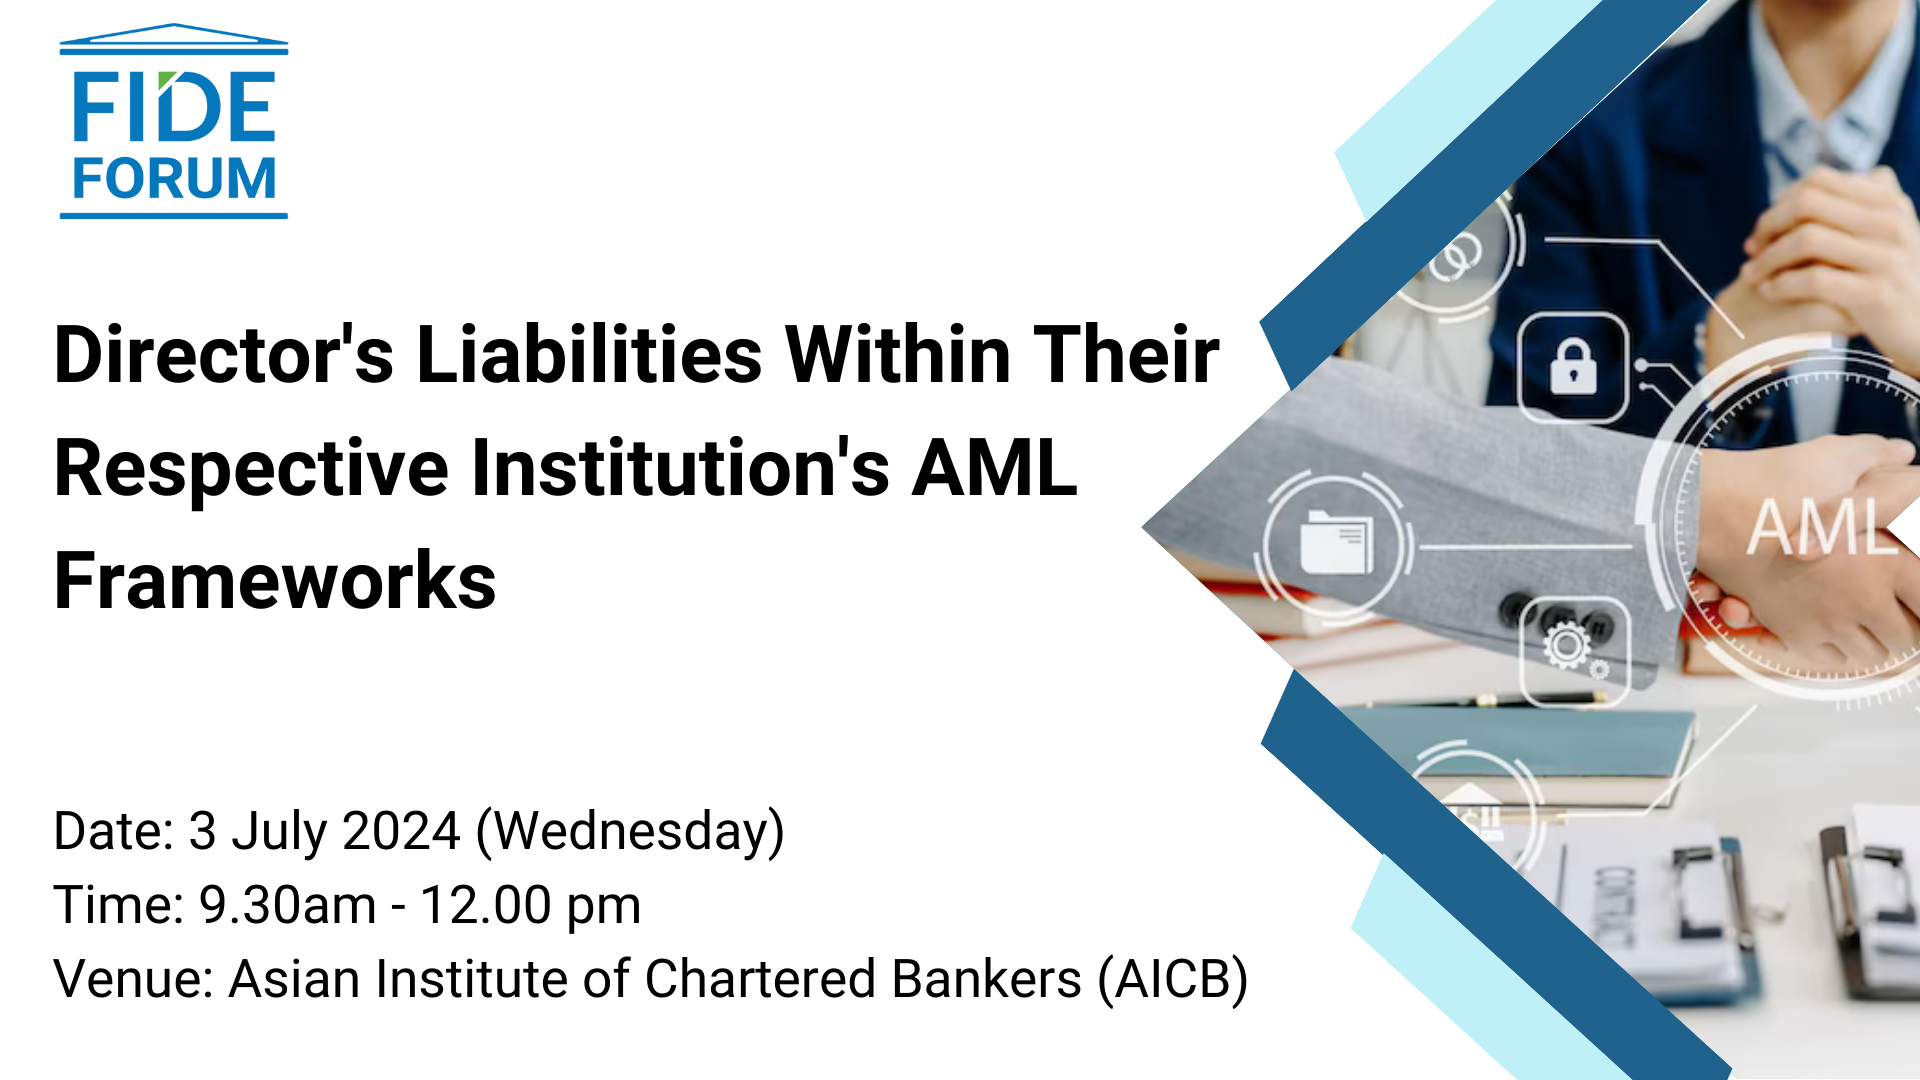 Director's Liabilities within Their Respective Institution's AML Frameworks